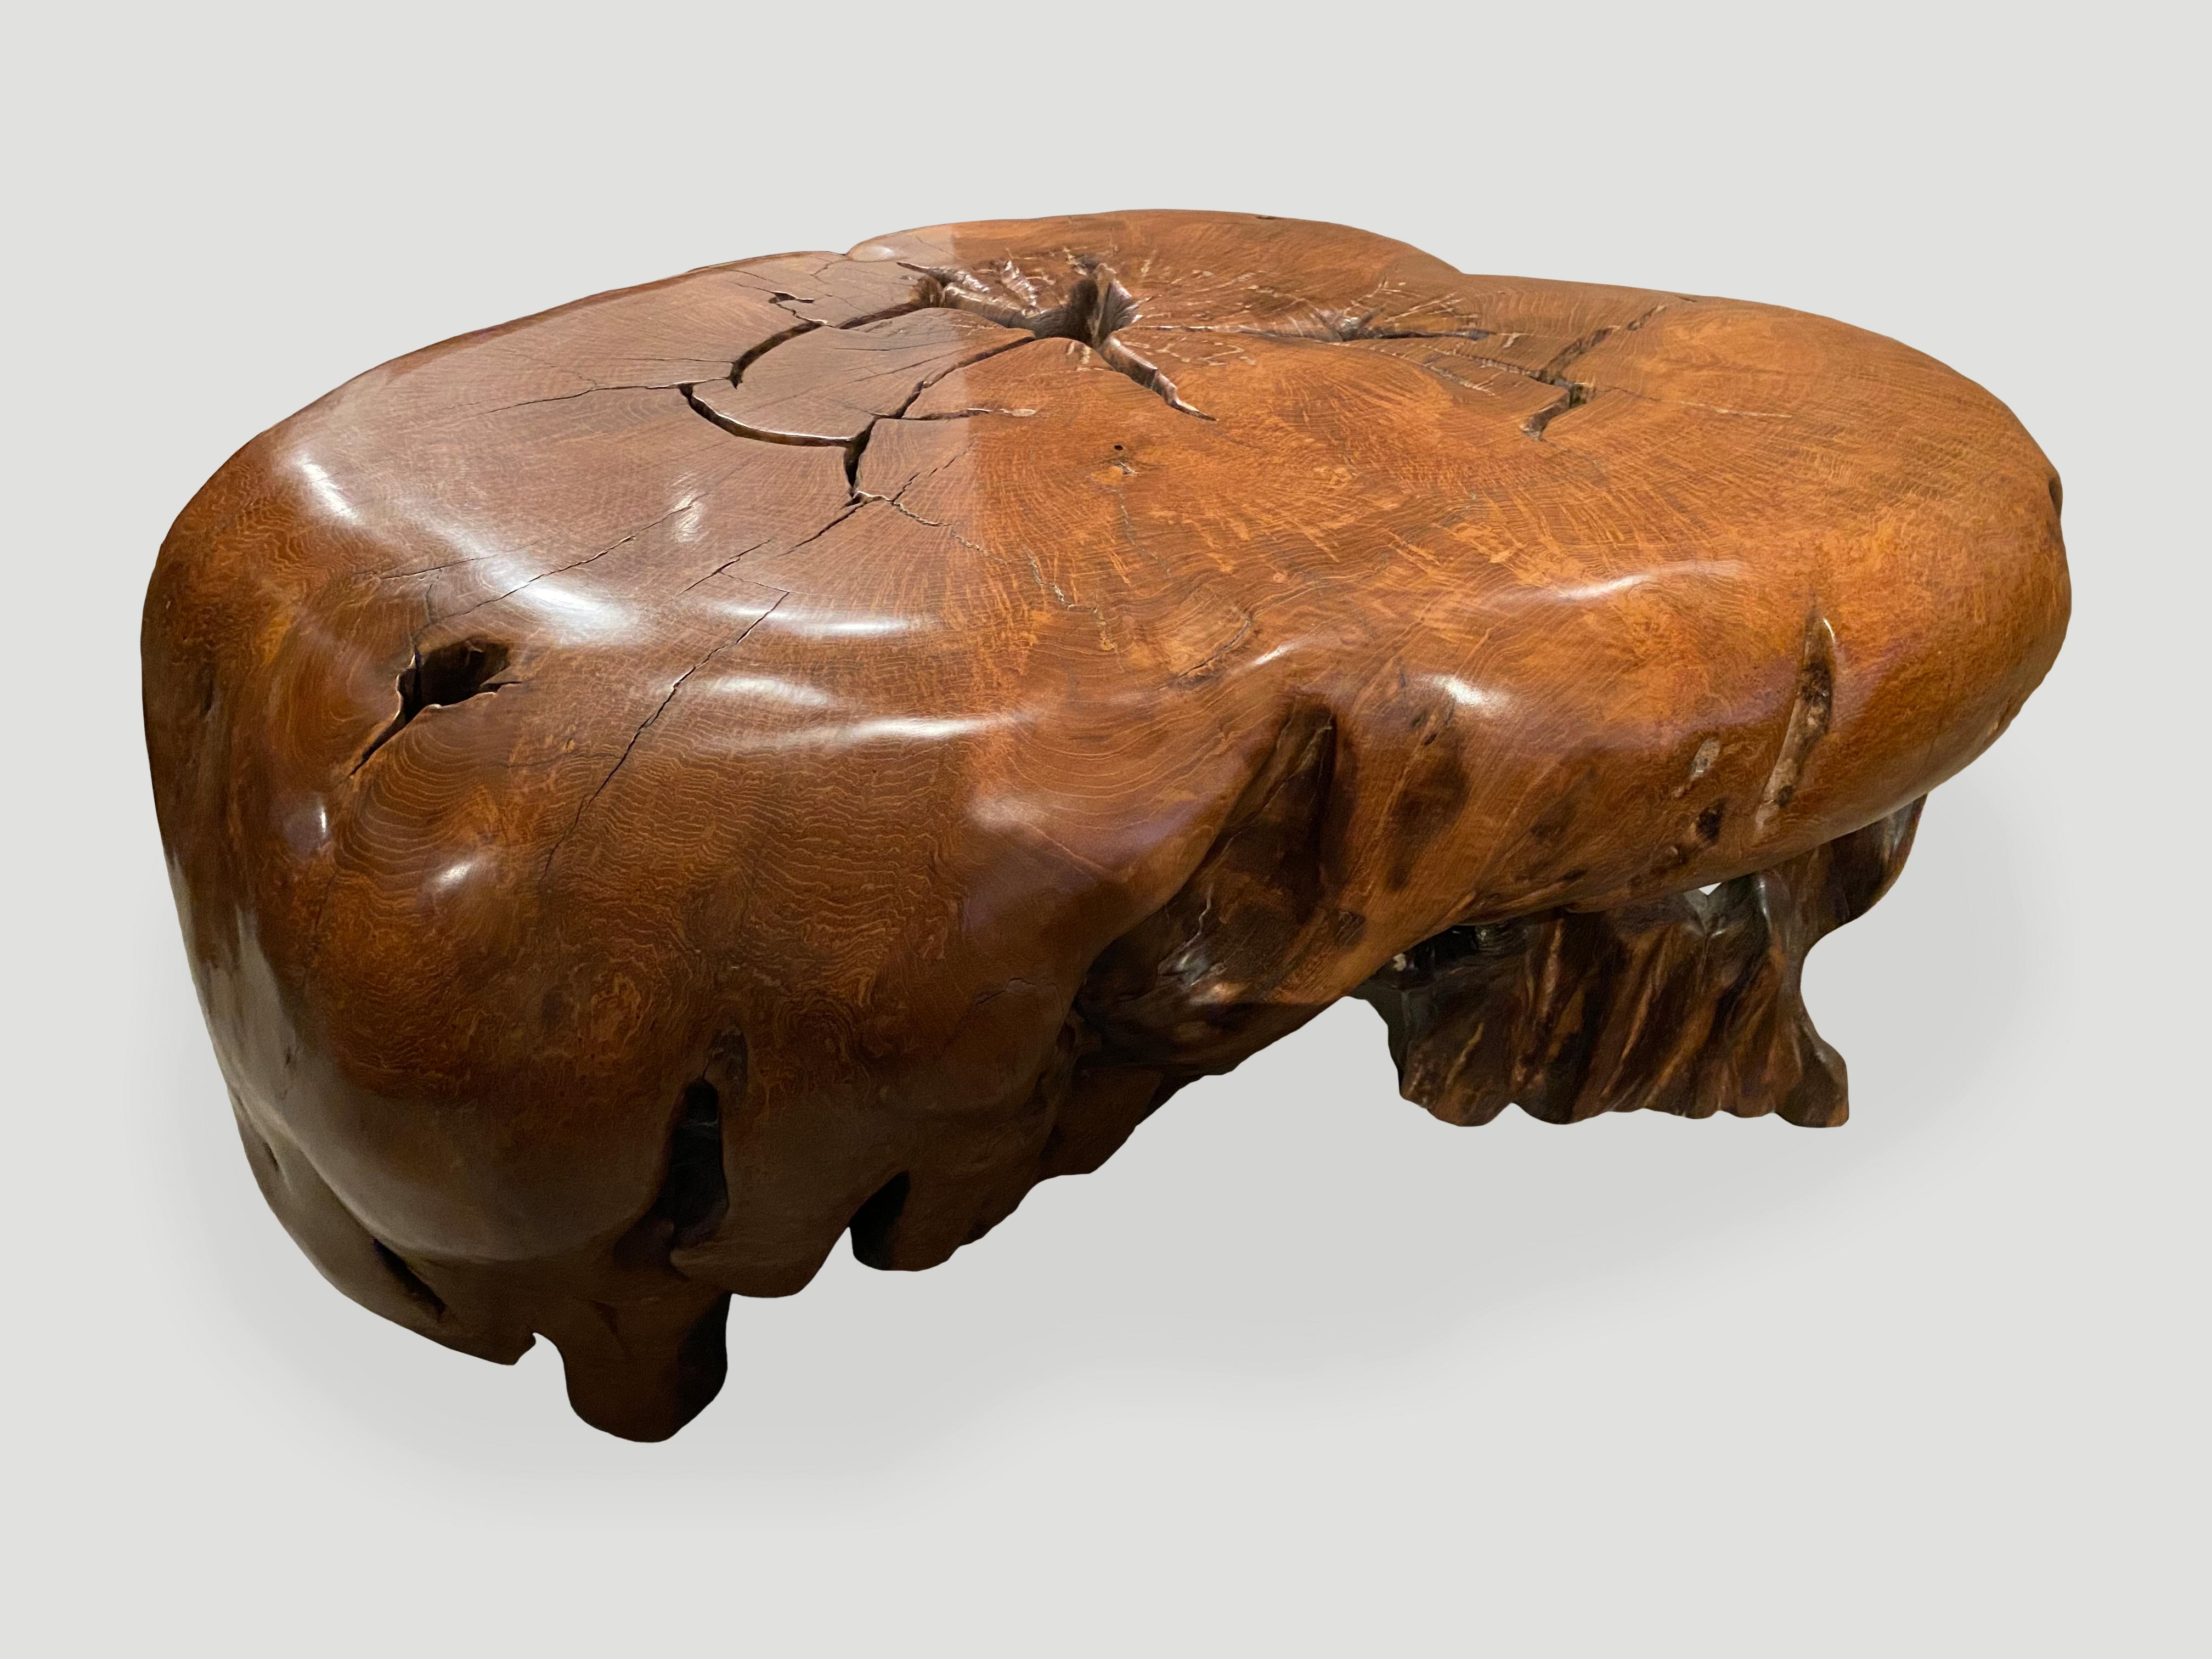 Beautiful grain in this stunning teak burl wood sculptural coffee table. The grain pattern is incredible and unable to be fully captured in an image. Natural oil finish. 

Own an Andrianna Shamaris original.

Andrianna Shamaris. The Leader In